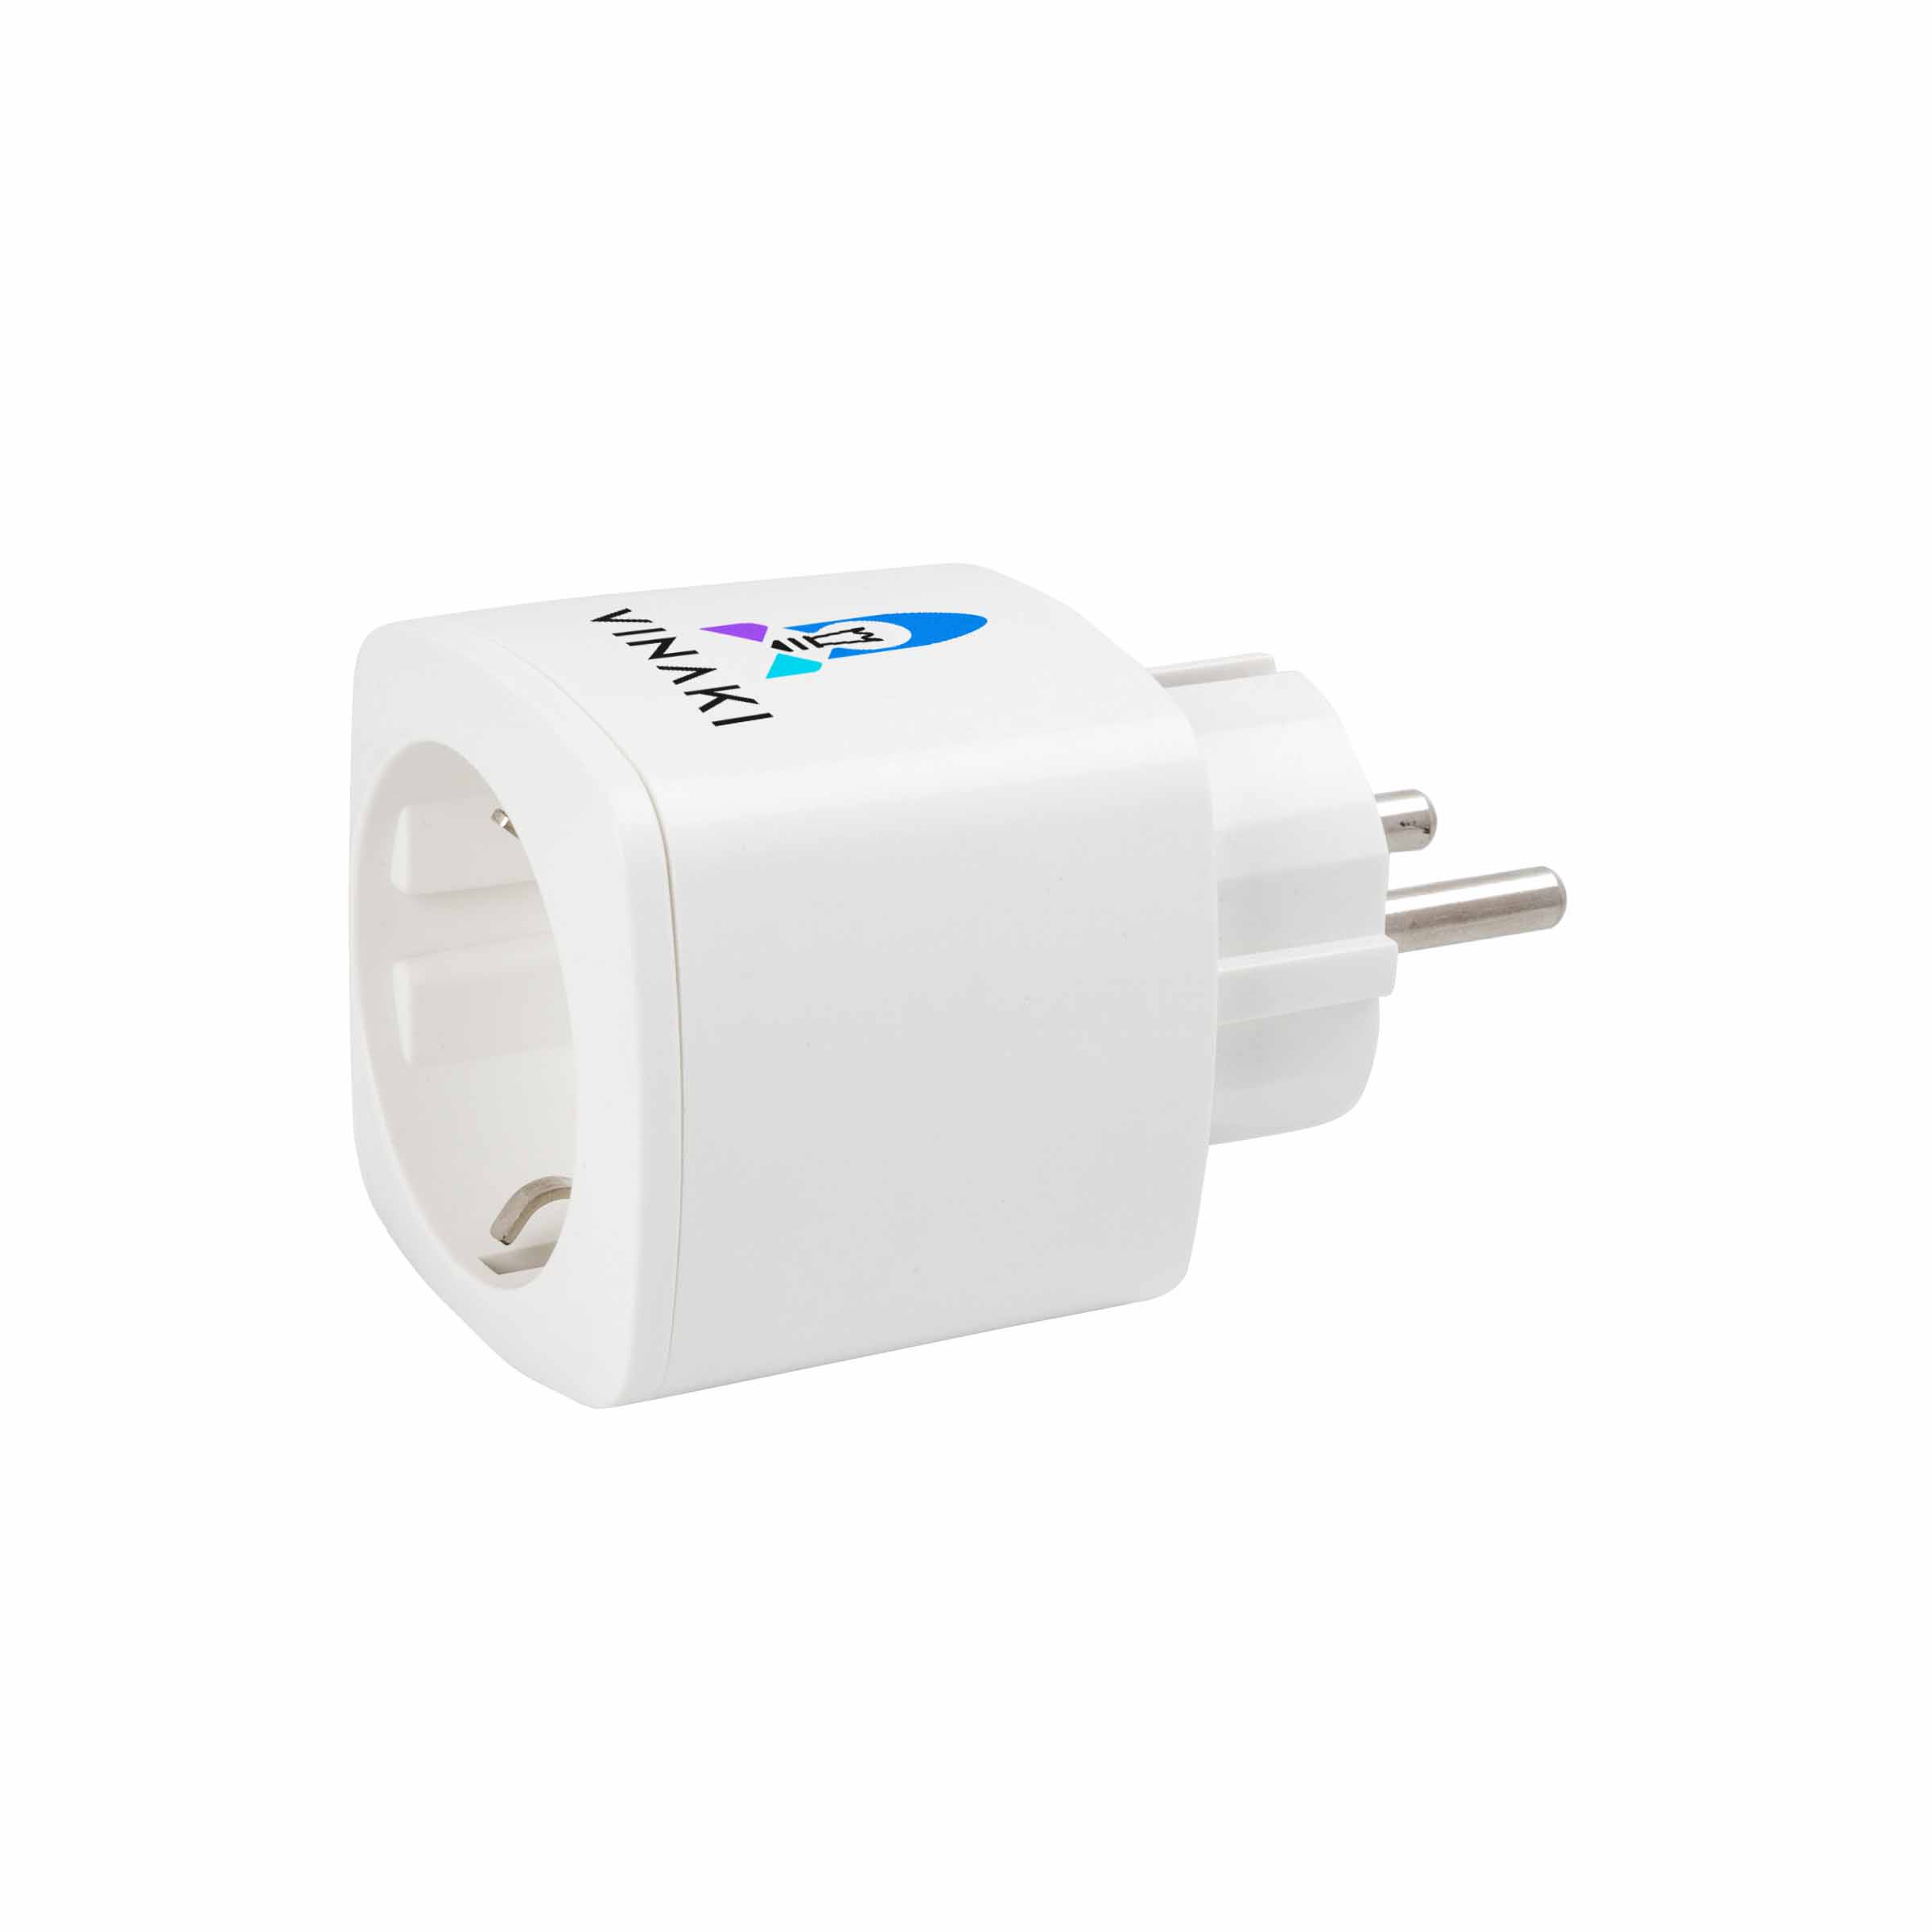 Denver Smart Home Plug SHP-102 - Personalisation with a full colour print and sleeve